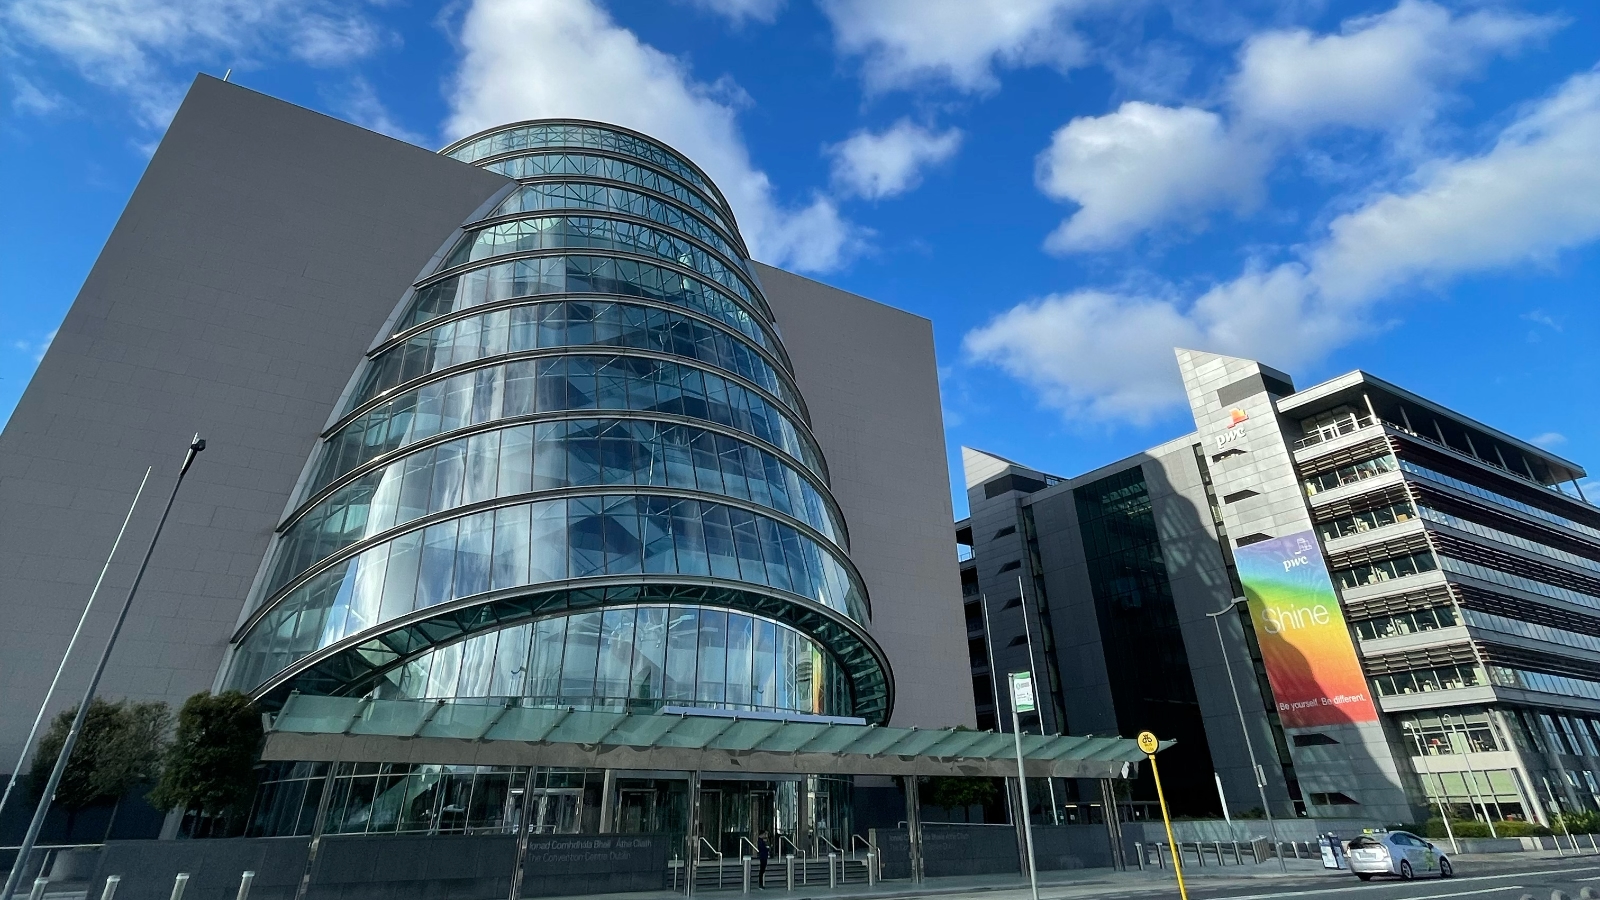 Large glass building in Dublin